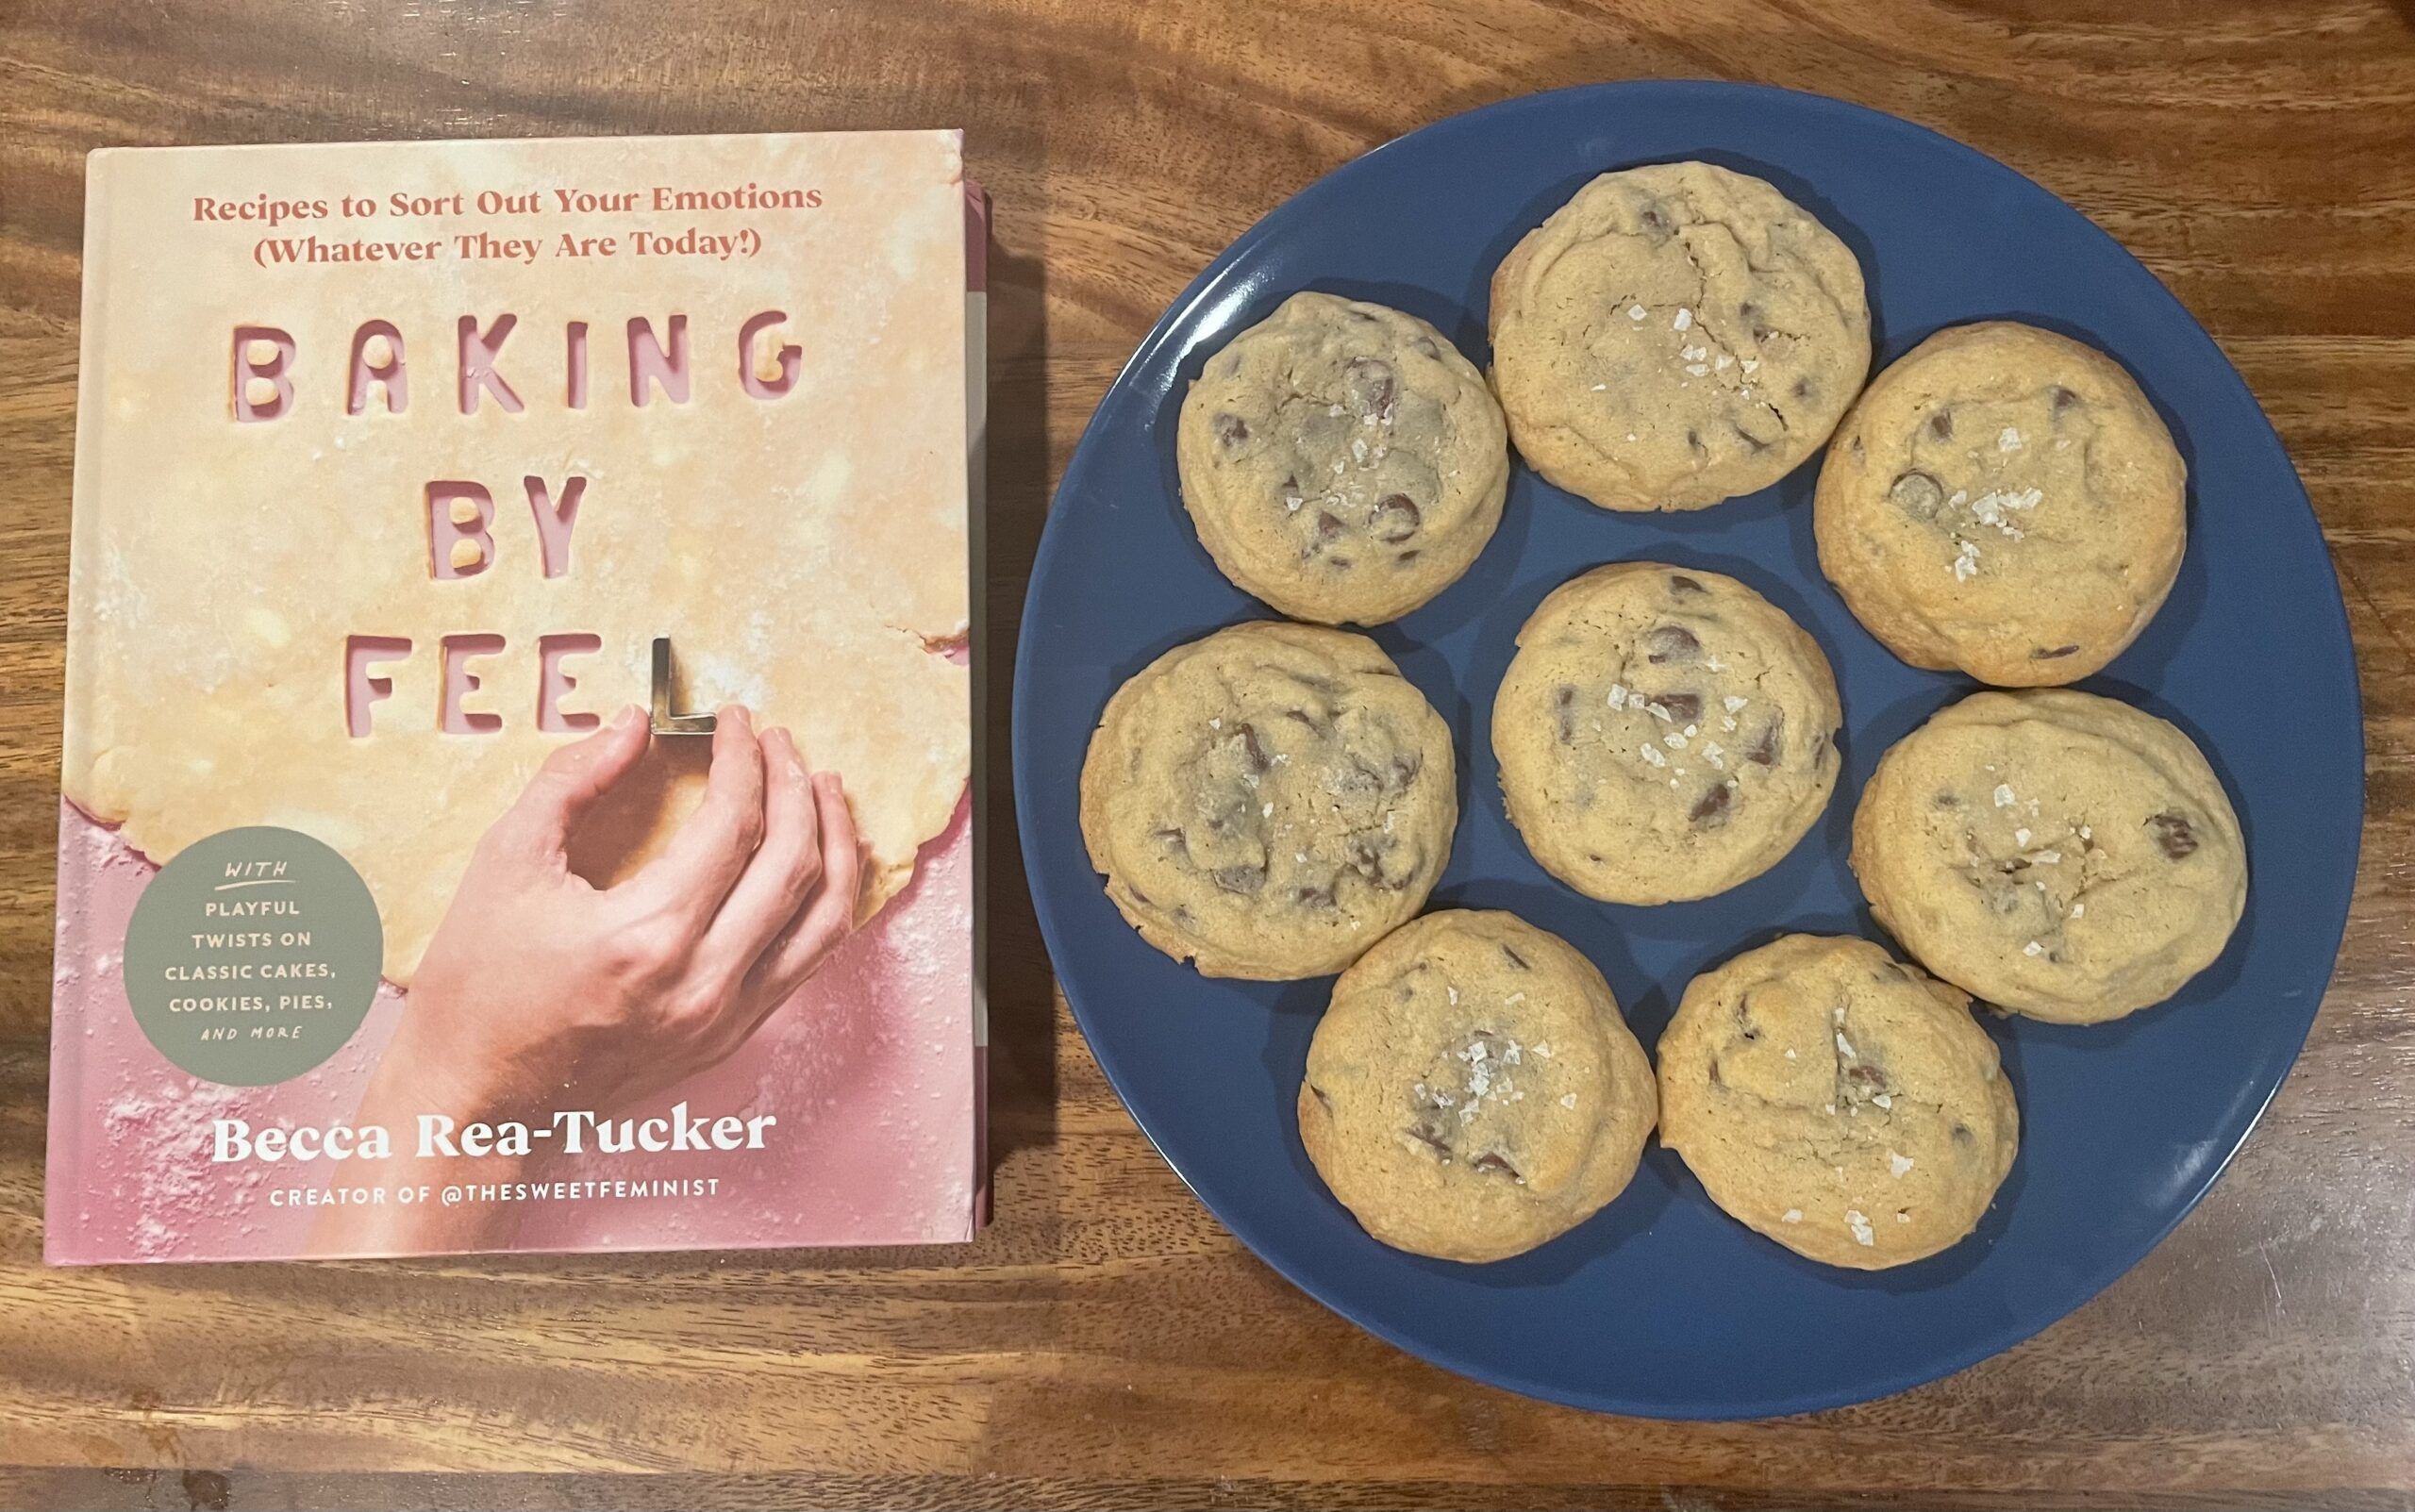 Baking By Feel cookbook on a wooden table next to a plate of fluffy, light brown chocolate chip cookies